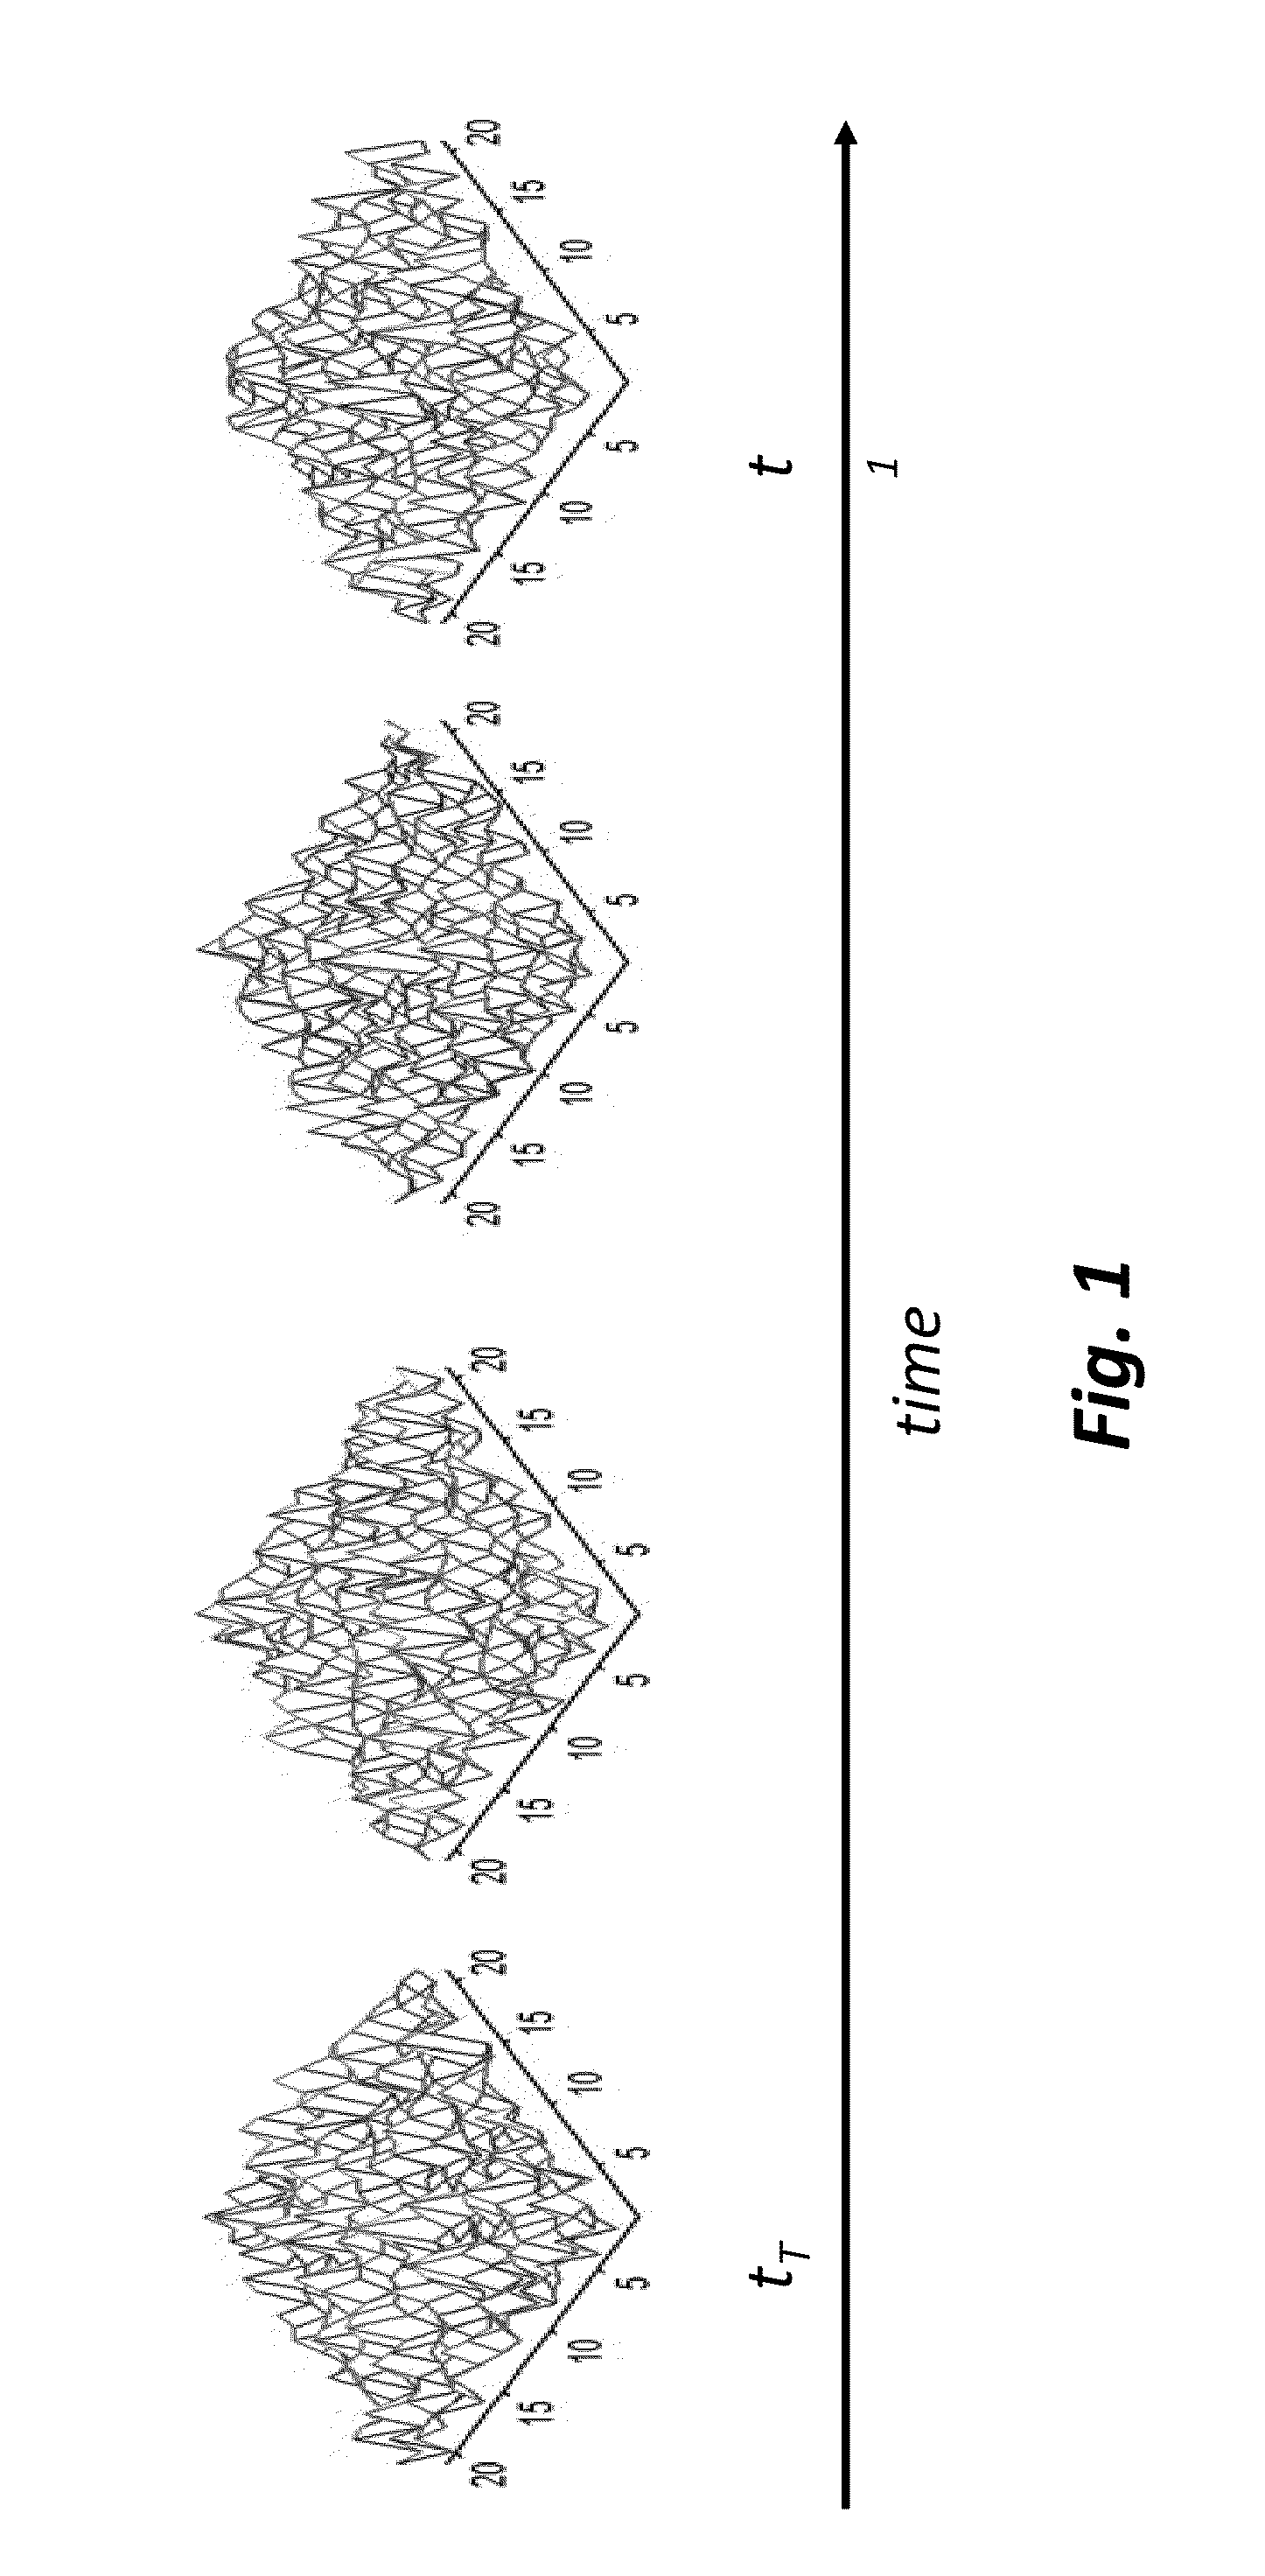 Method for Detecting Small Targets in Radar Images Using Needle Based Hypotheses Verification